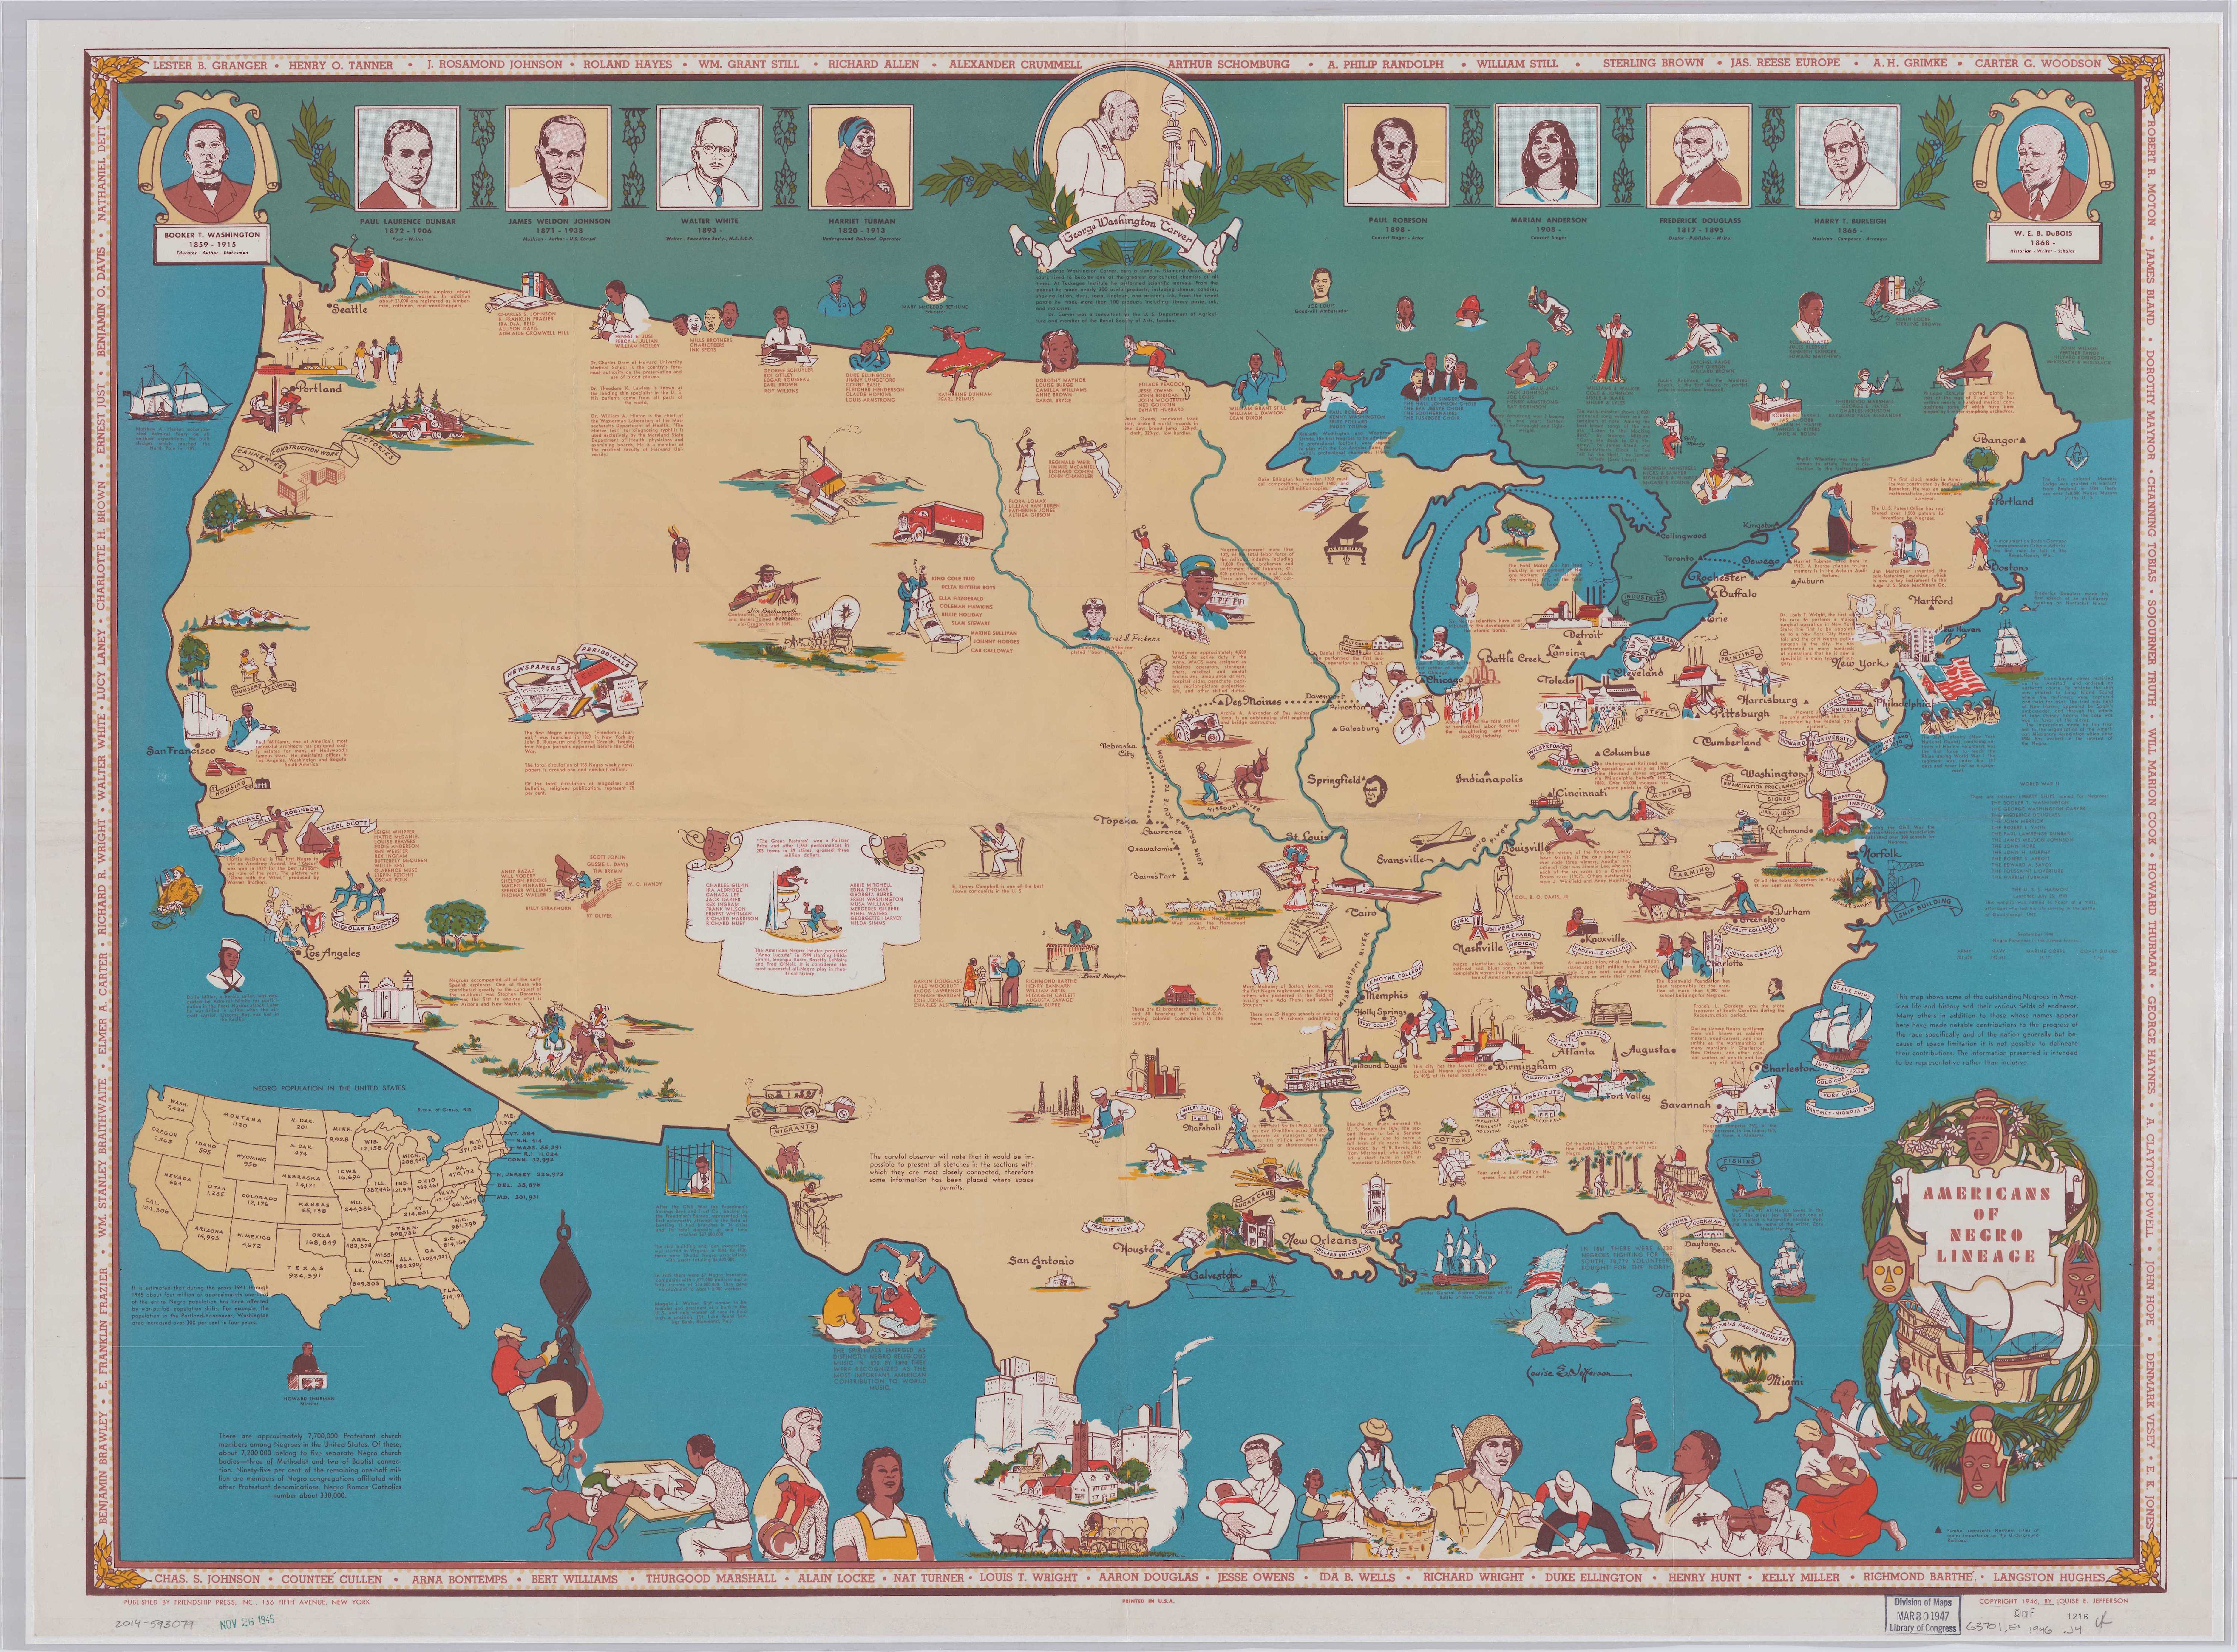 Jefferson&rsquo;s Americans of Negro lineage map is just one from a series highlighting marginalized communities in the United States.